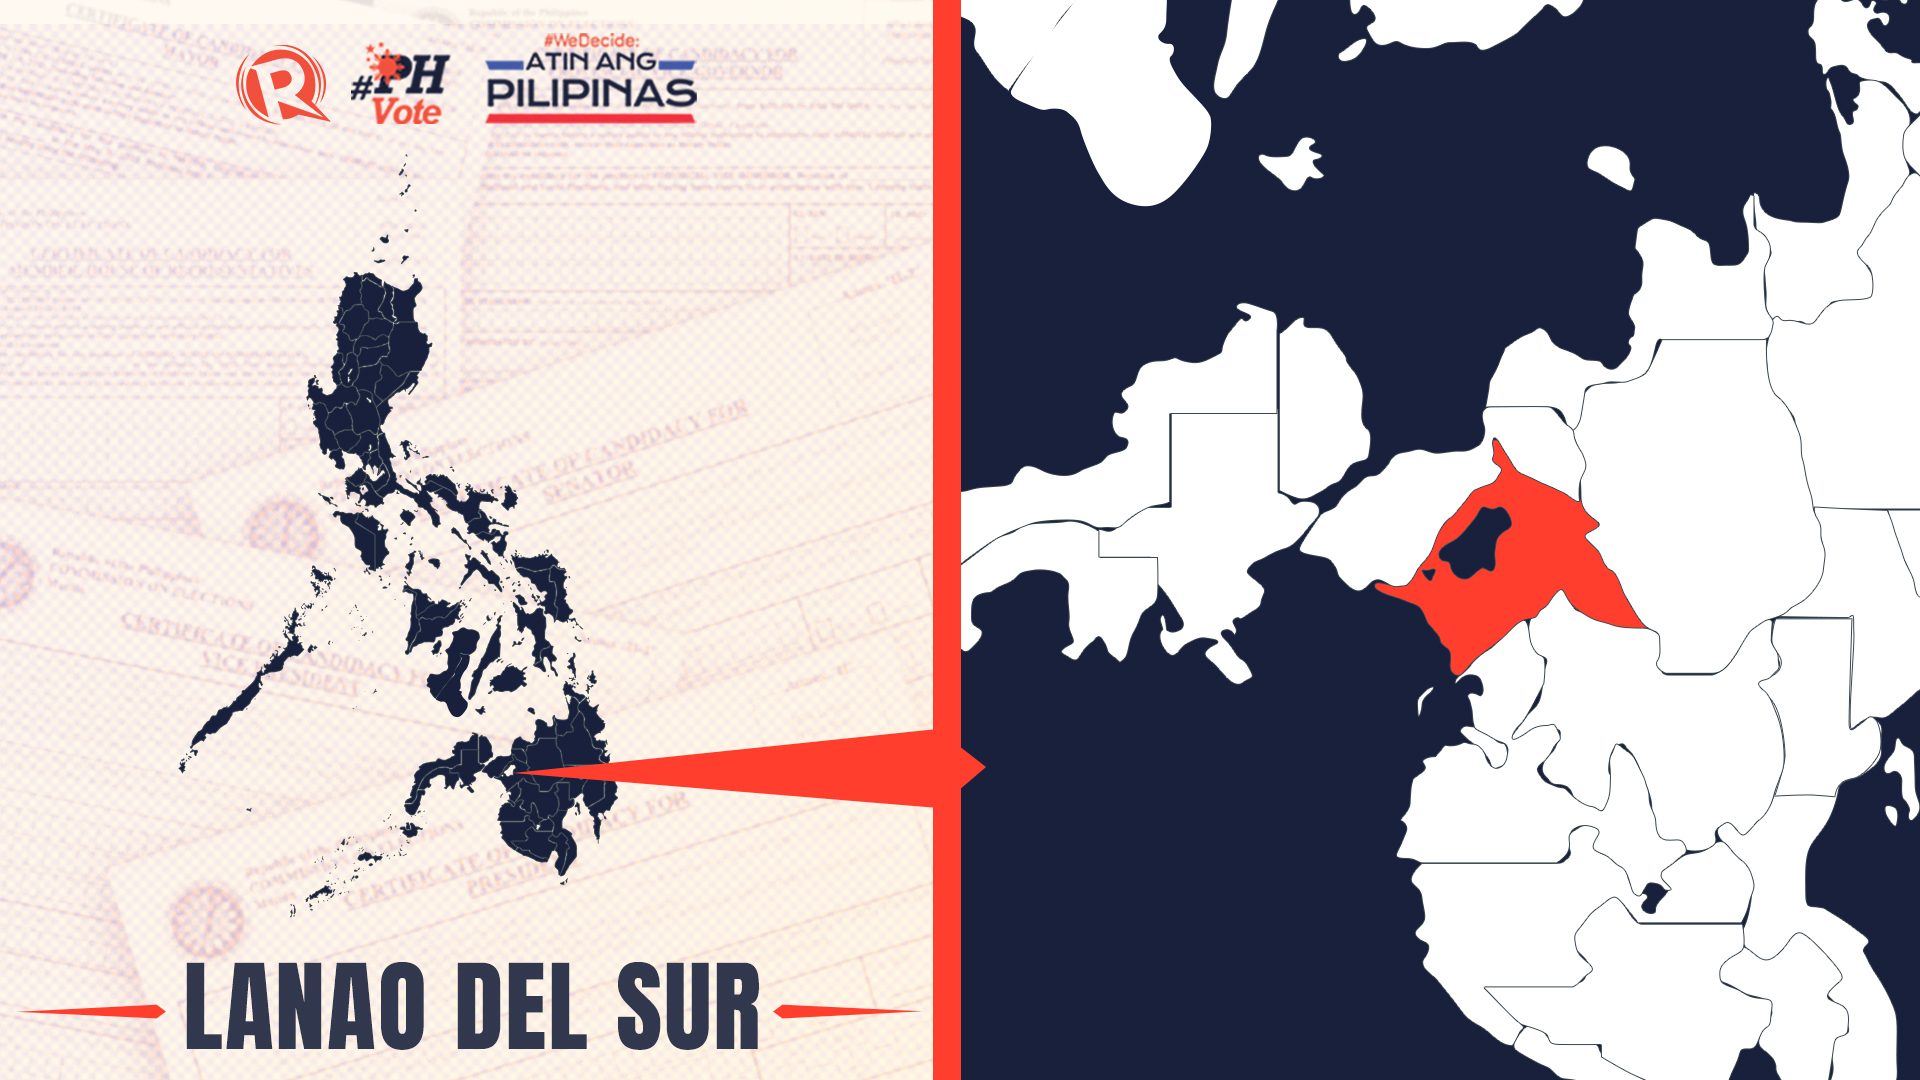 LIST: Who is running in Lanao del Sur in the 2022 Philippine elections?